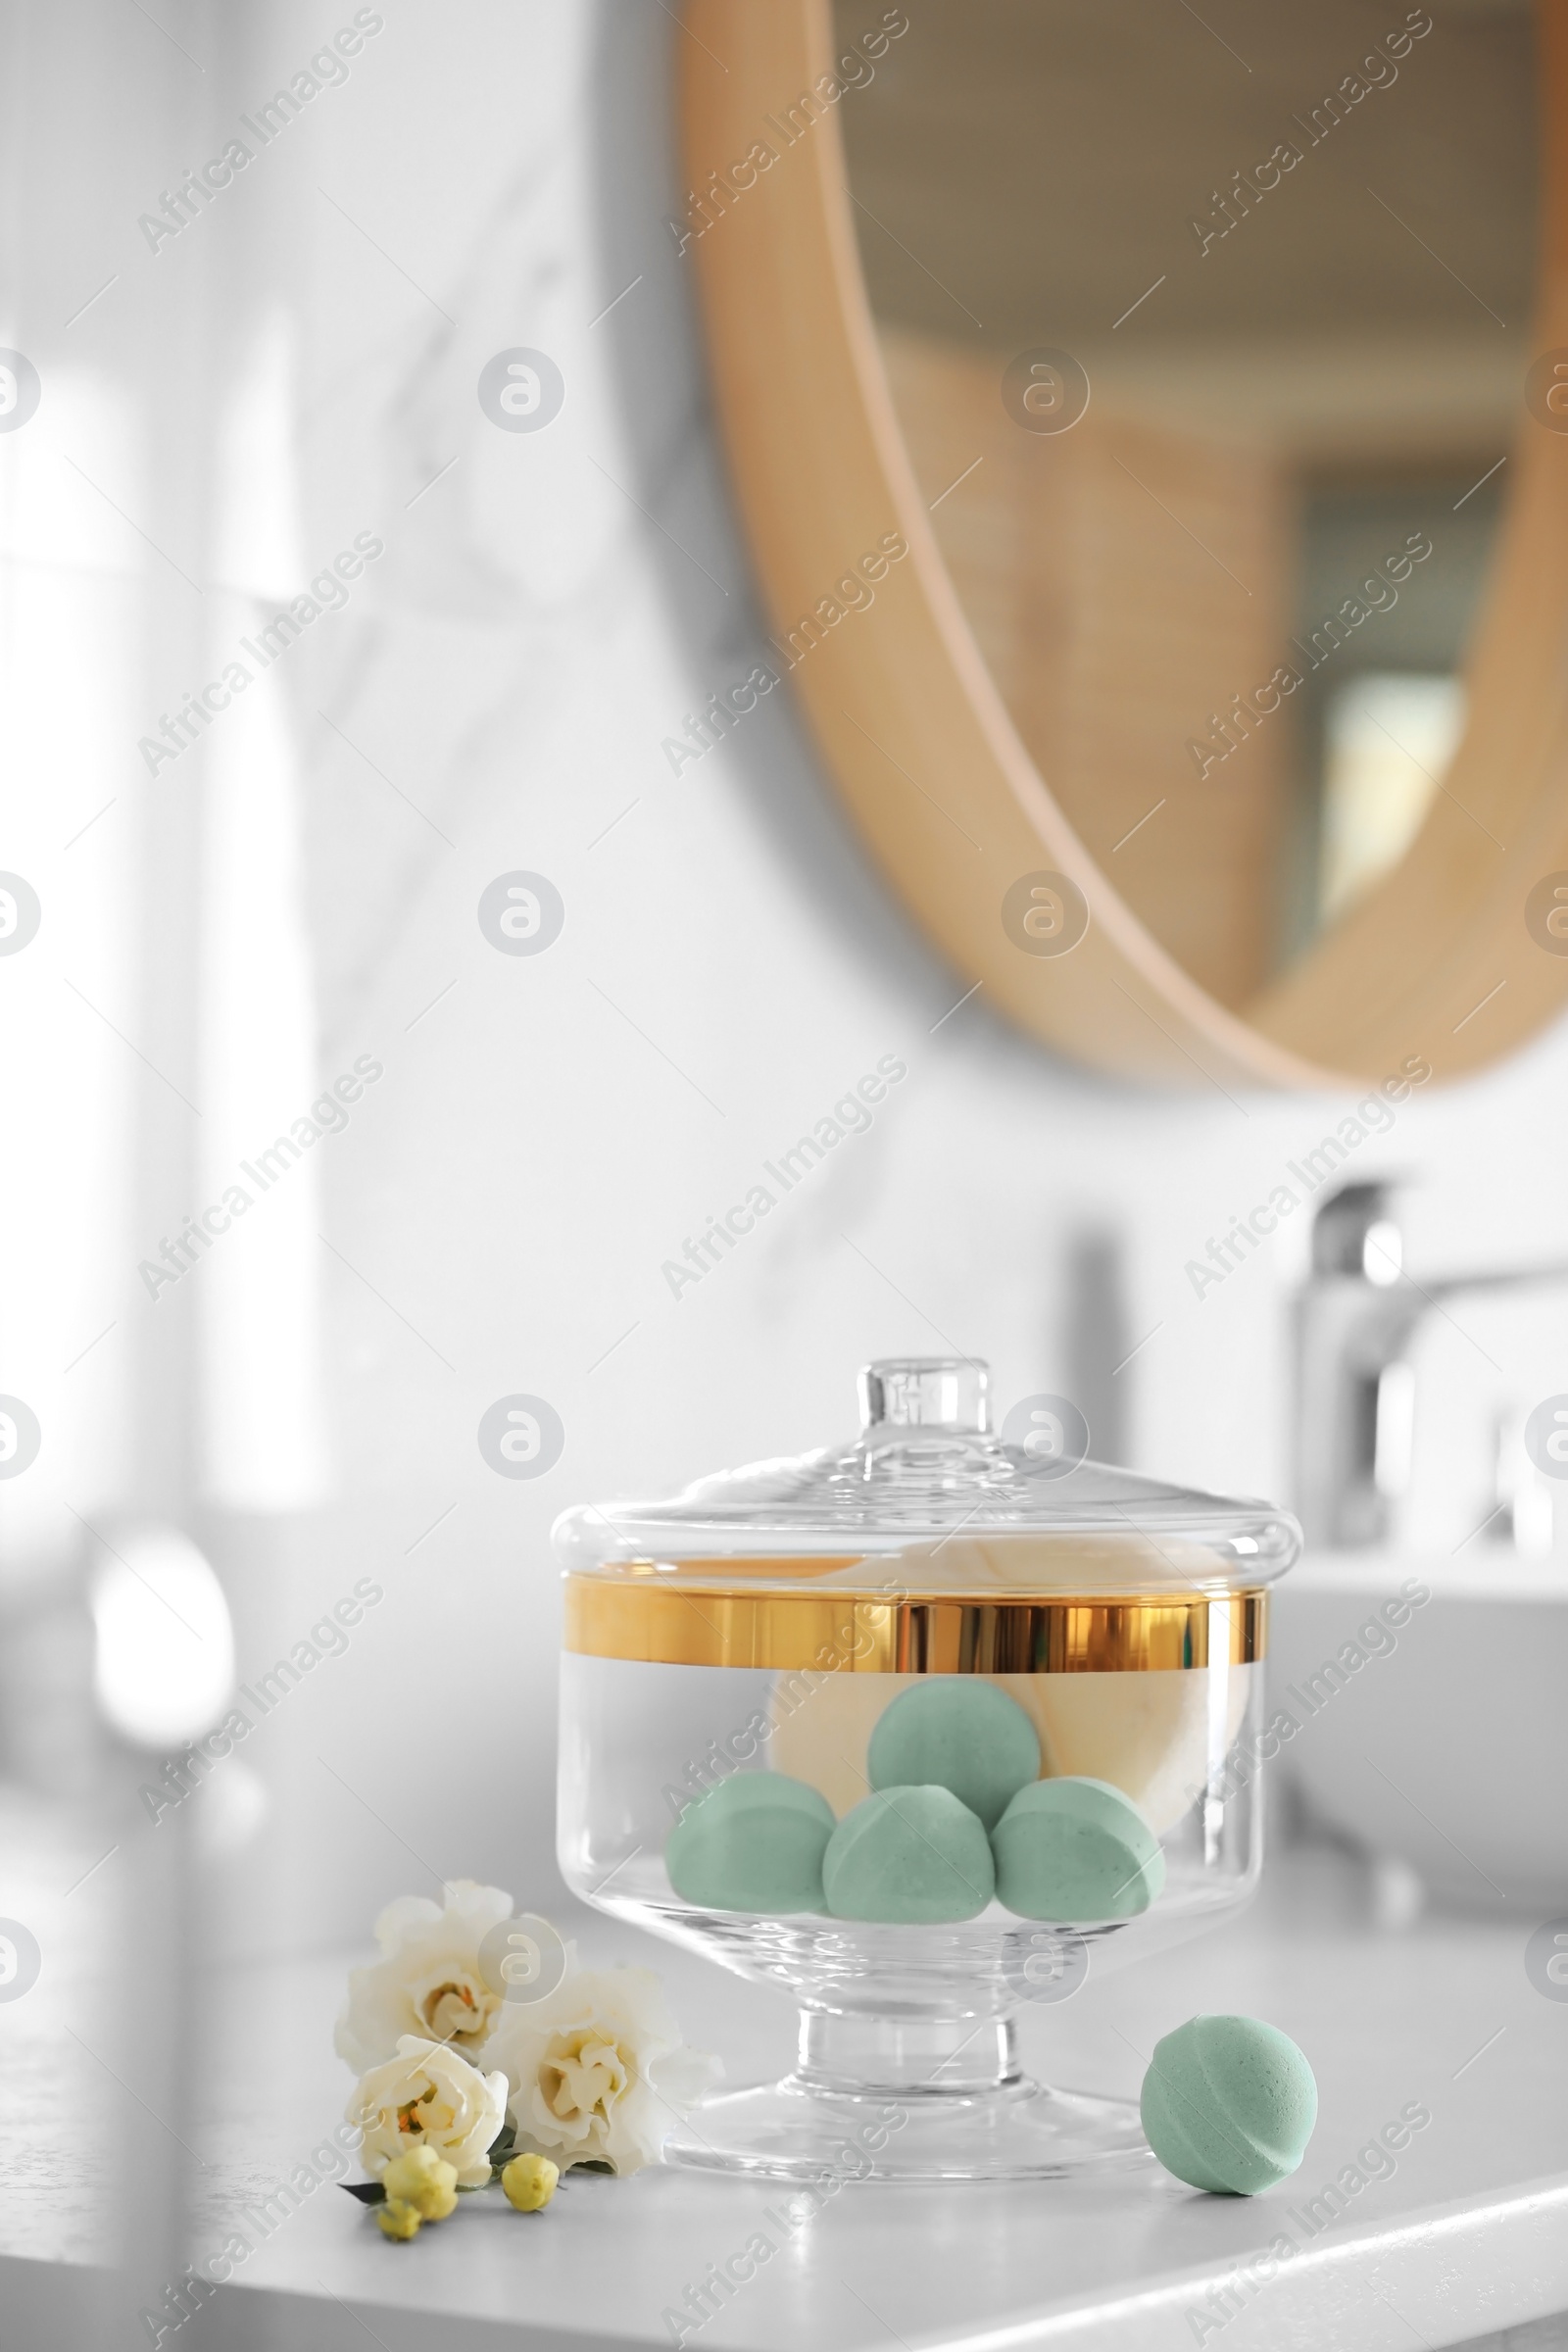 Photo of Jar with bath bombs and bath sponge on white countertop indoors